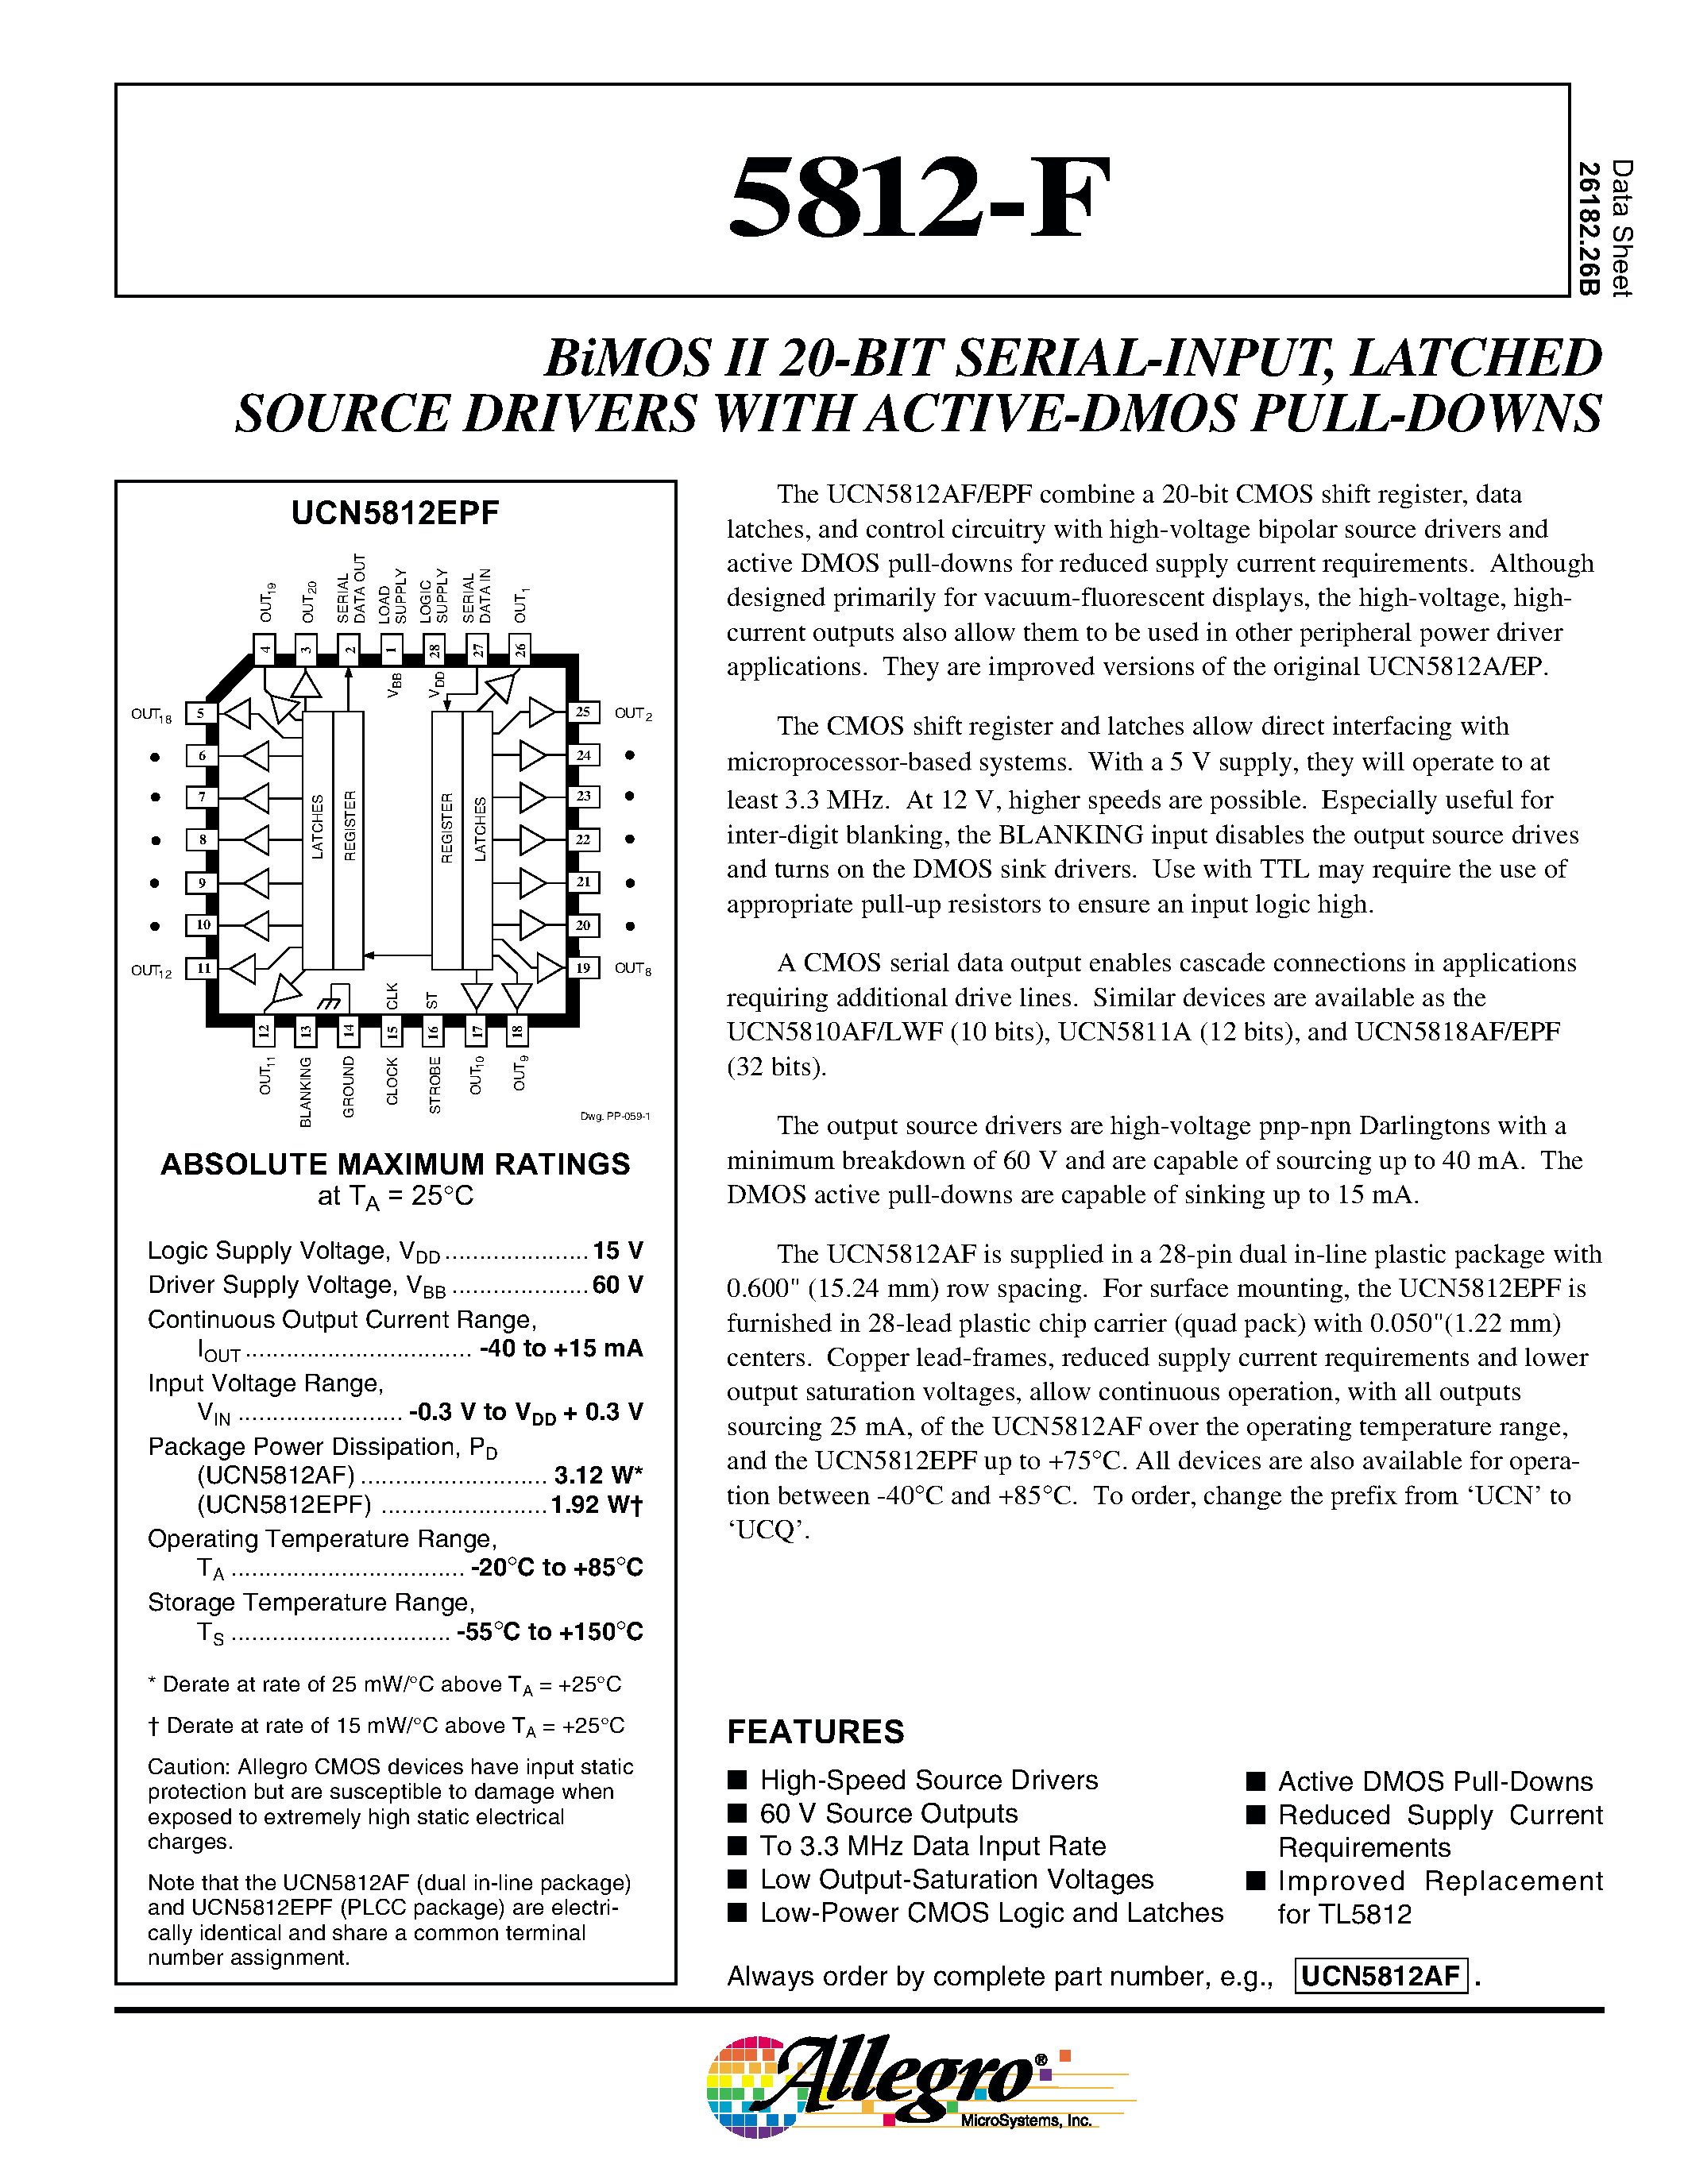 Datasheet UCN5812F - BiMOS II 20-BIT SERIAL-INPUT / LATCHED SOURCE DRIVERS WITH ACTIVE-DMOS PULL-DOWNS page 1